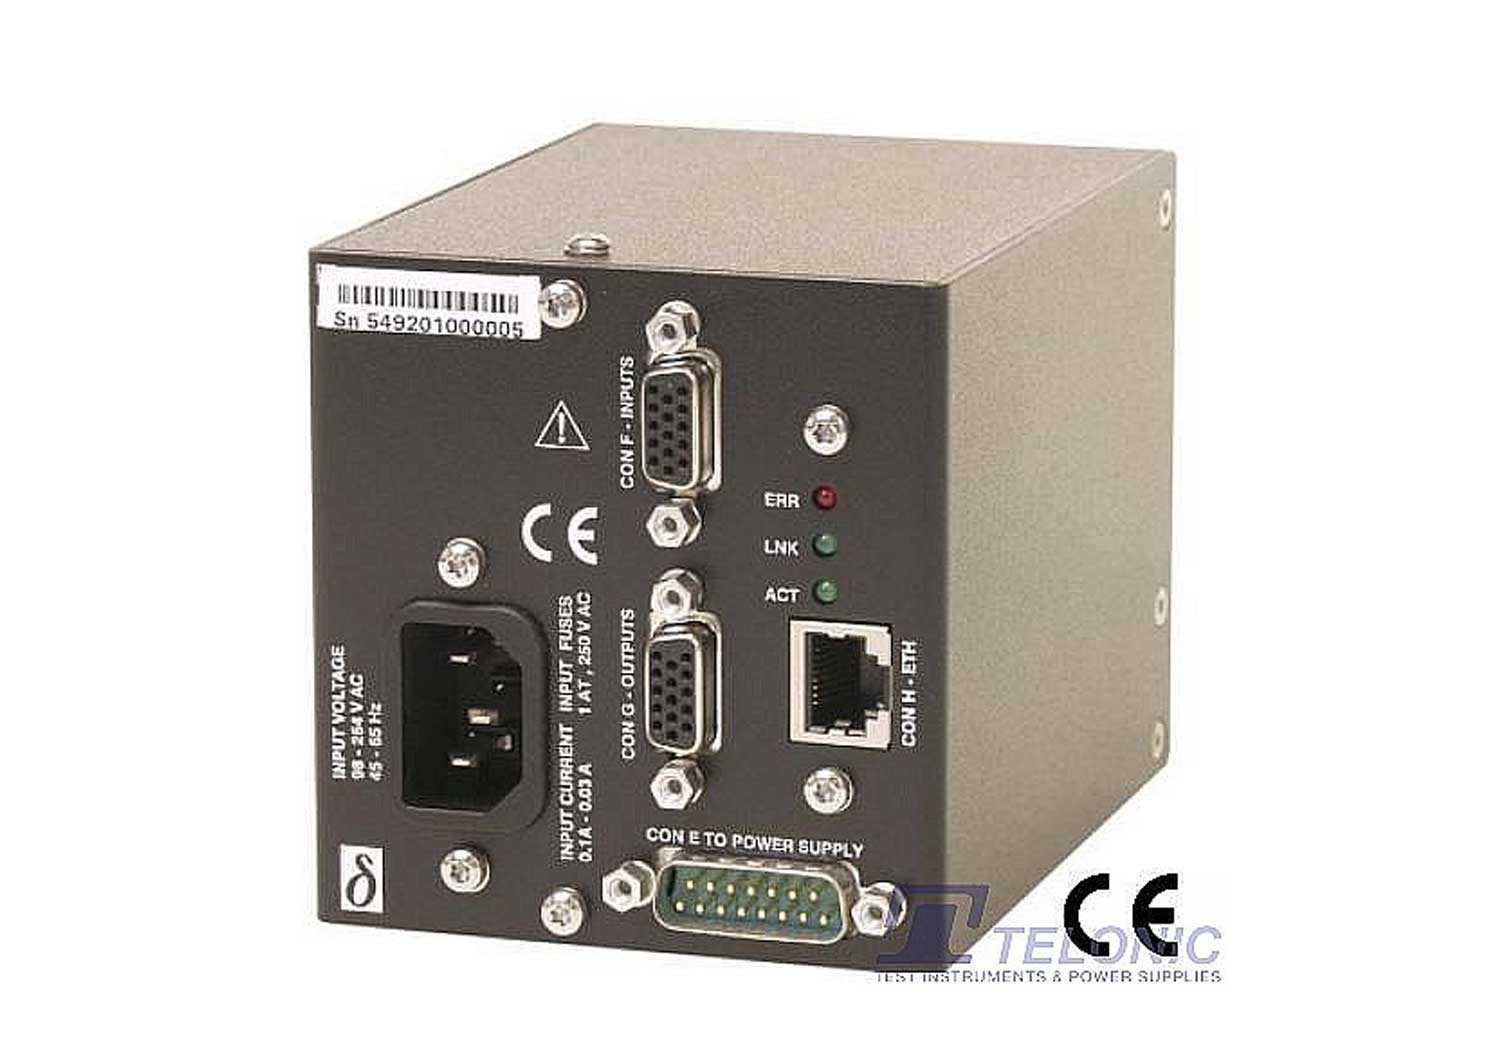 Connect To Analogue, PSC-ETH, Ethernet external Interface Option For SM1500